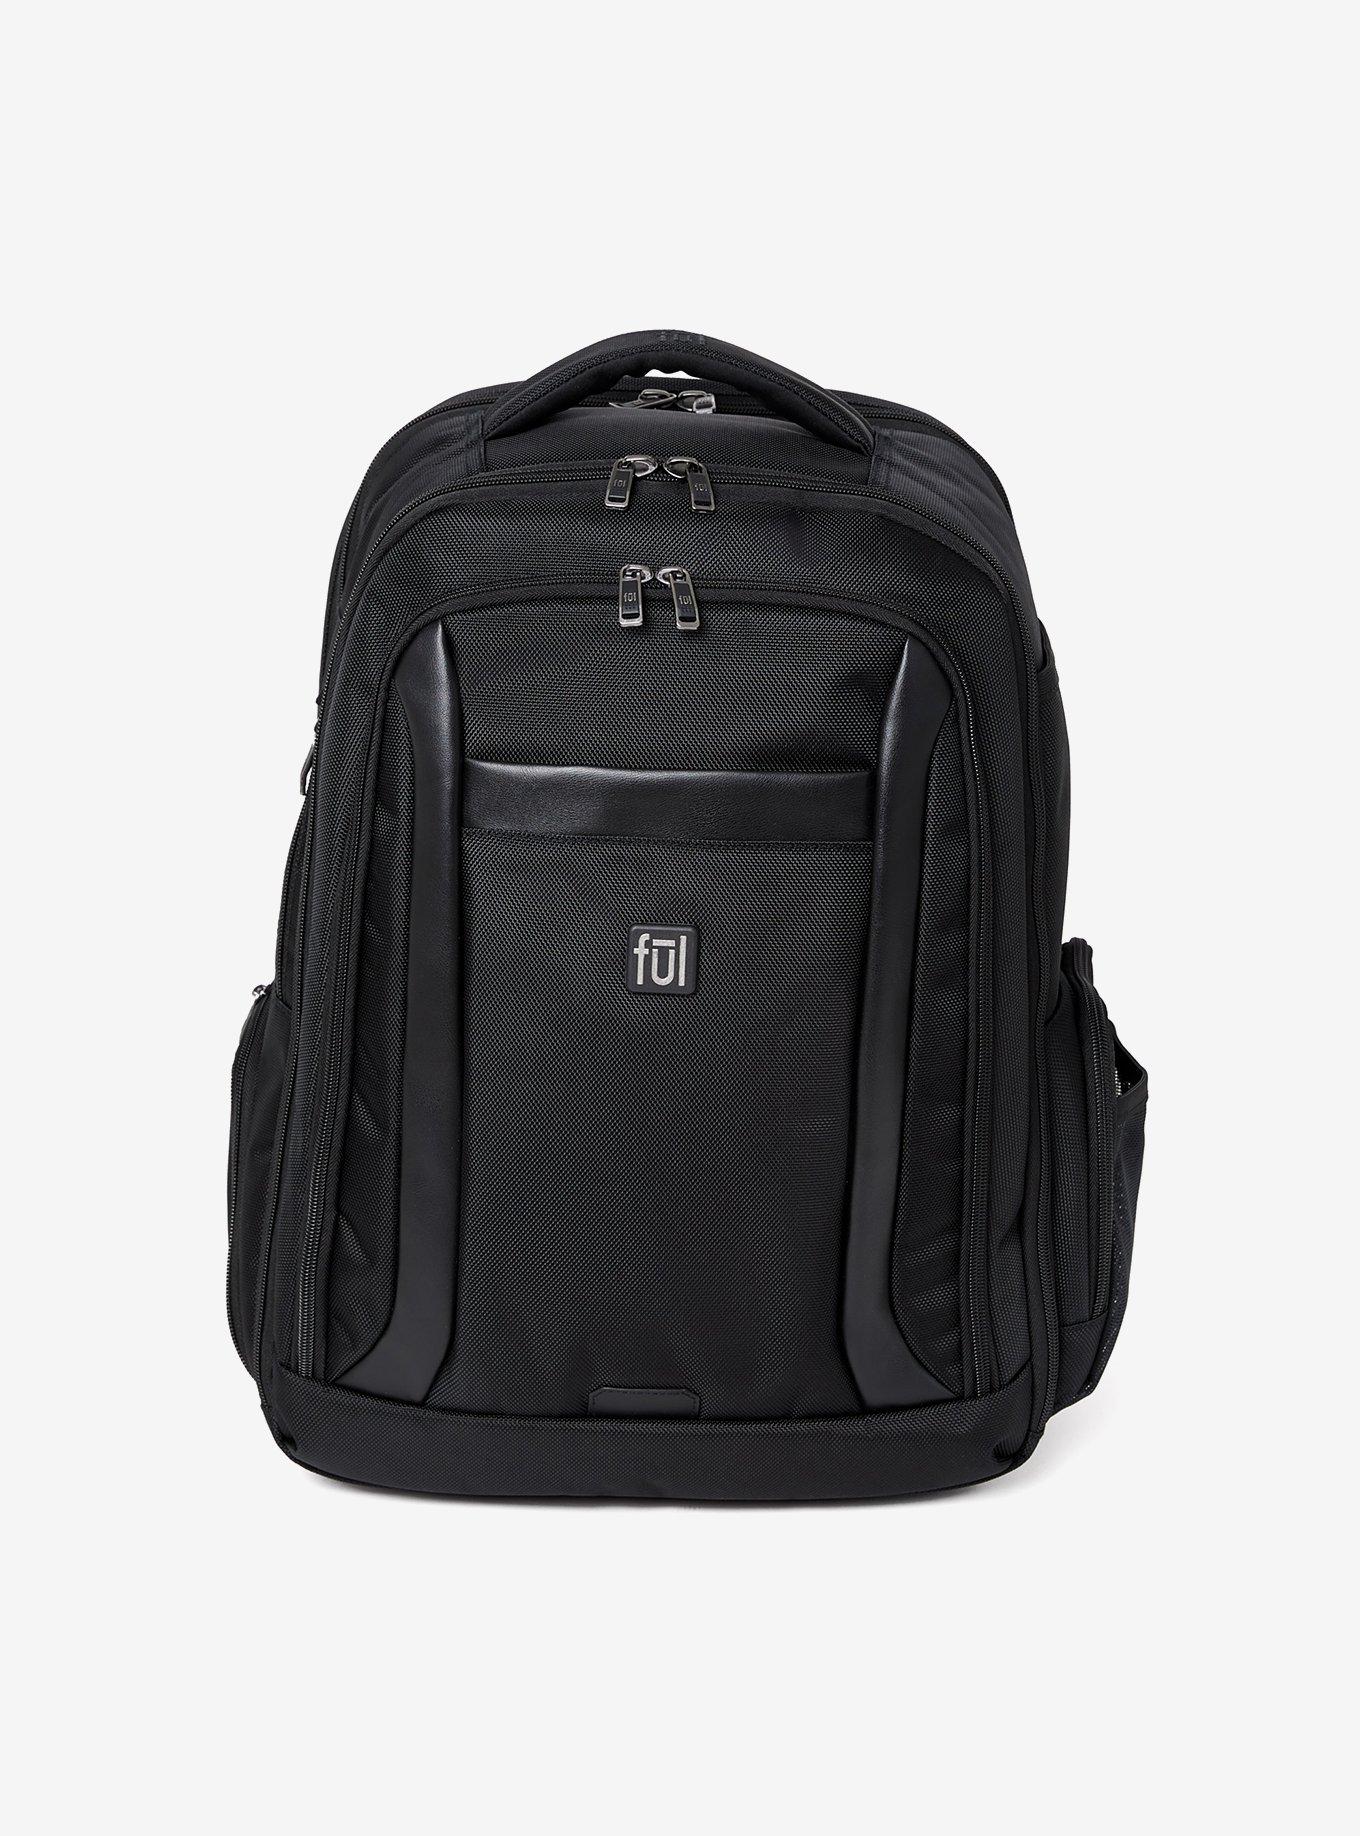 FUL Heritage Classic Laptop Backpack | BoxLunch